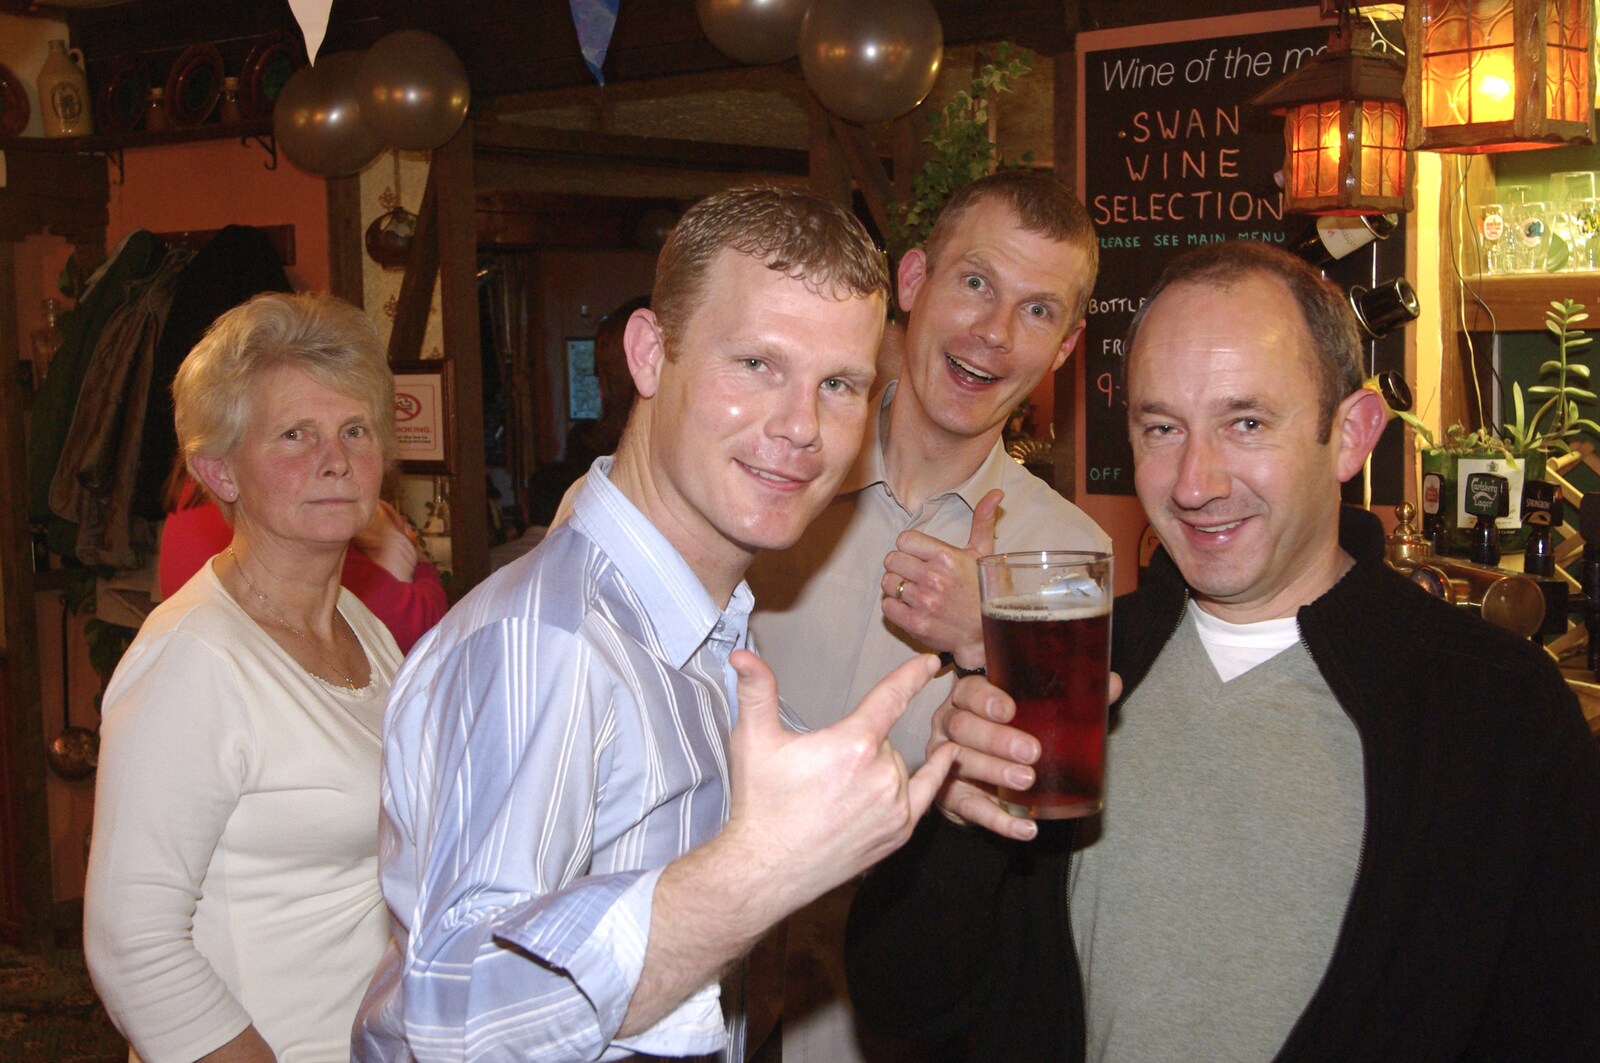 Mikey-P, Andy and DH with a beer from The Swan's 25th Anniversary, Brome, Suffolk - 14th November 2008